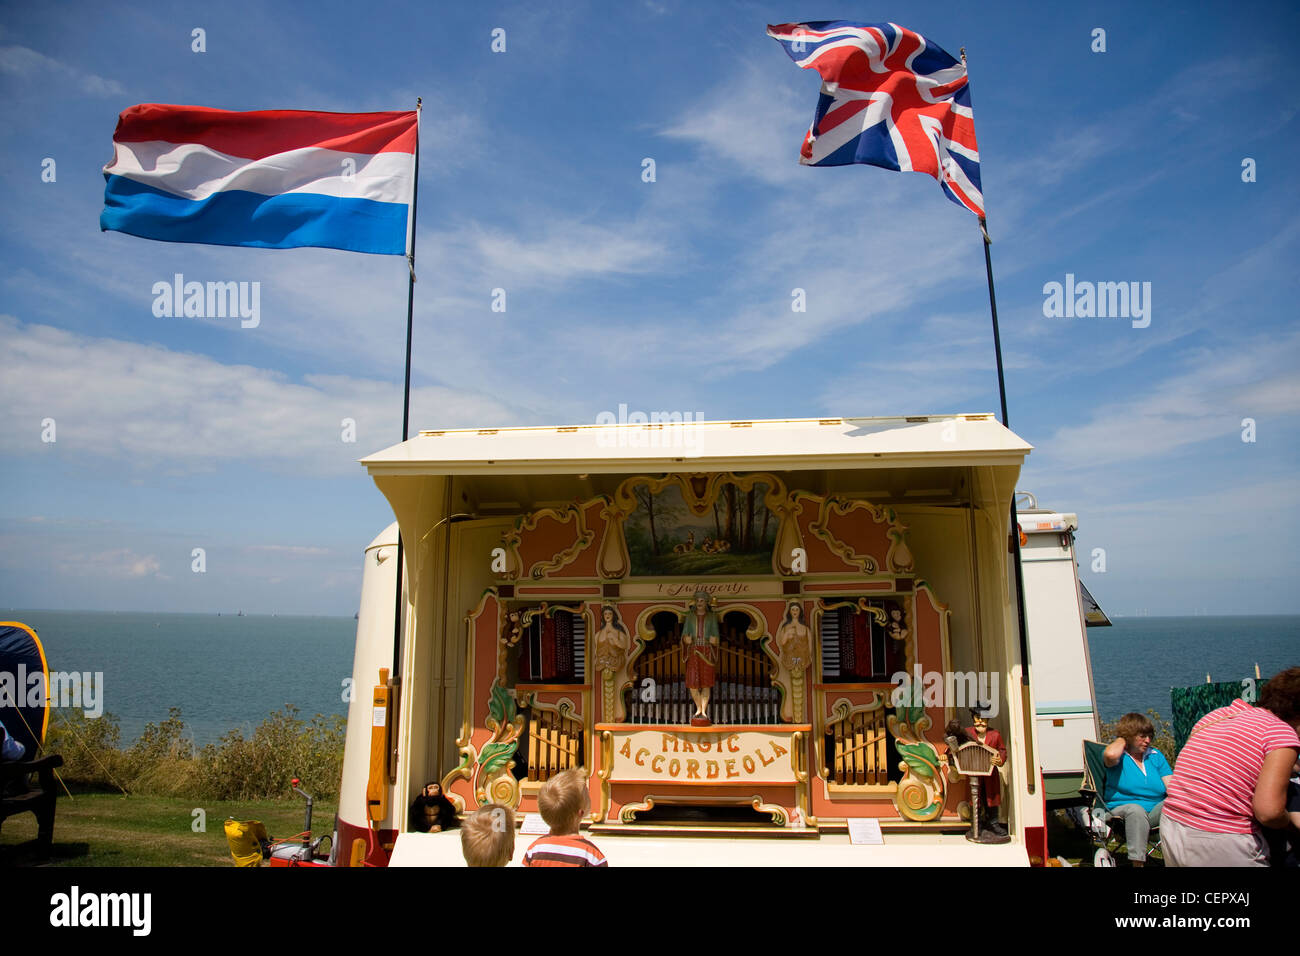 A 41-key Heesbeen 'Magic Accordeola' fair organ by the seafront at a fair in Whitstable. Stock Photo